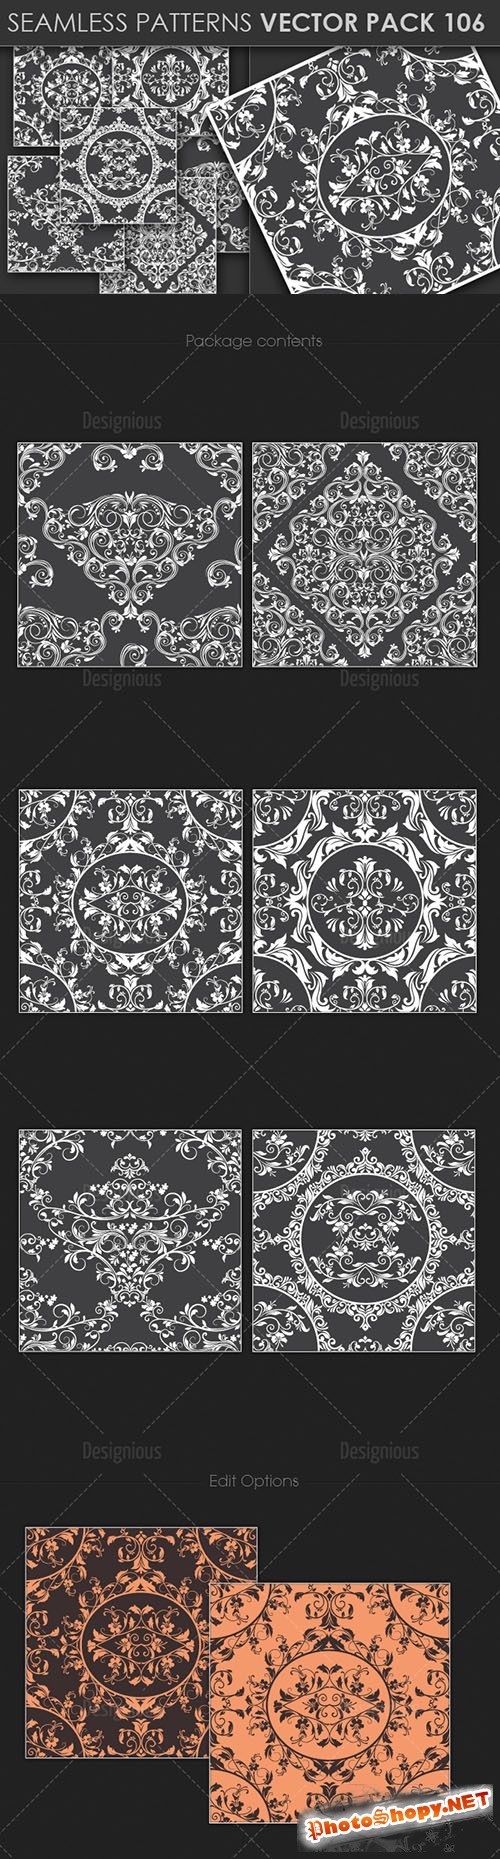 Seamless Patterns Vector Pack 106